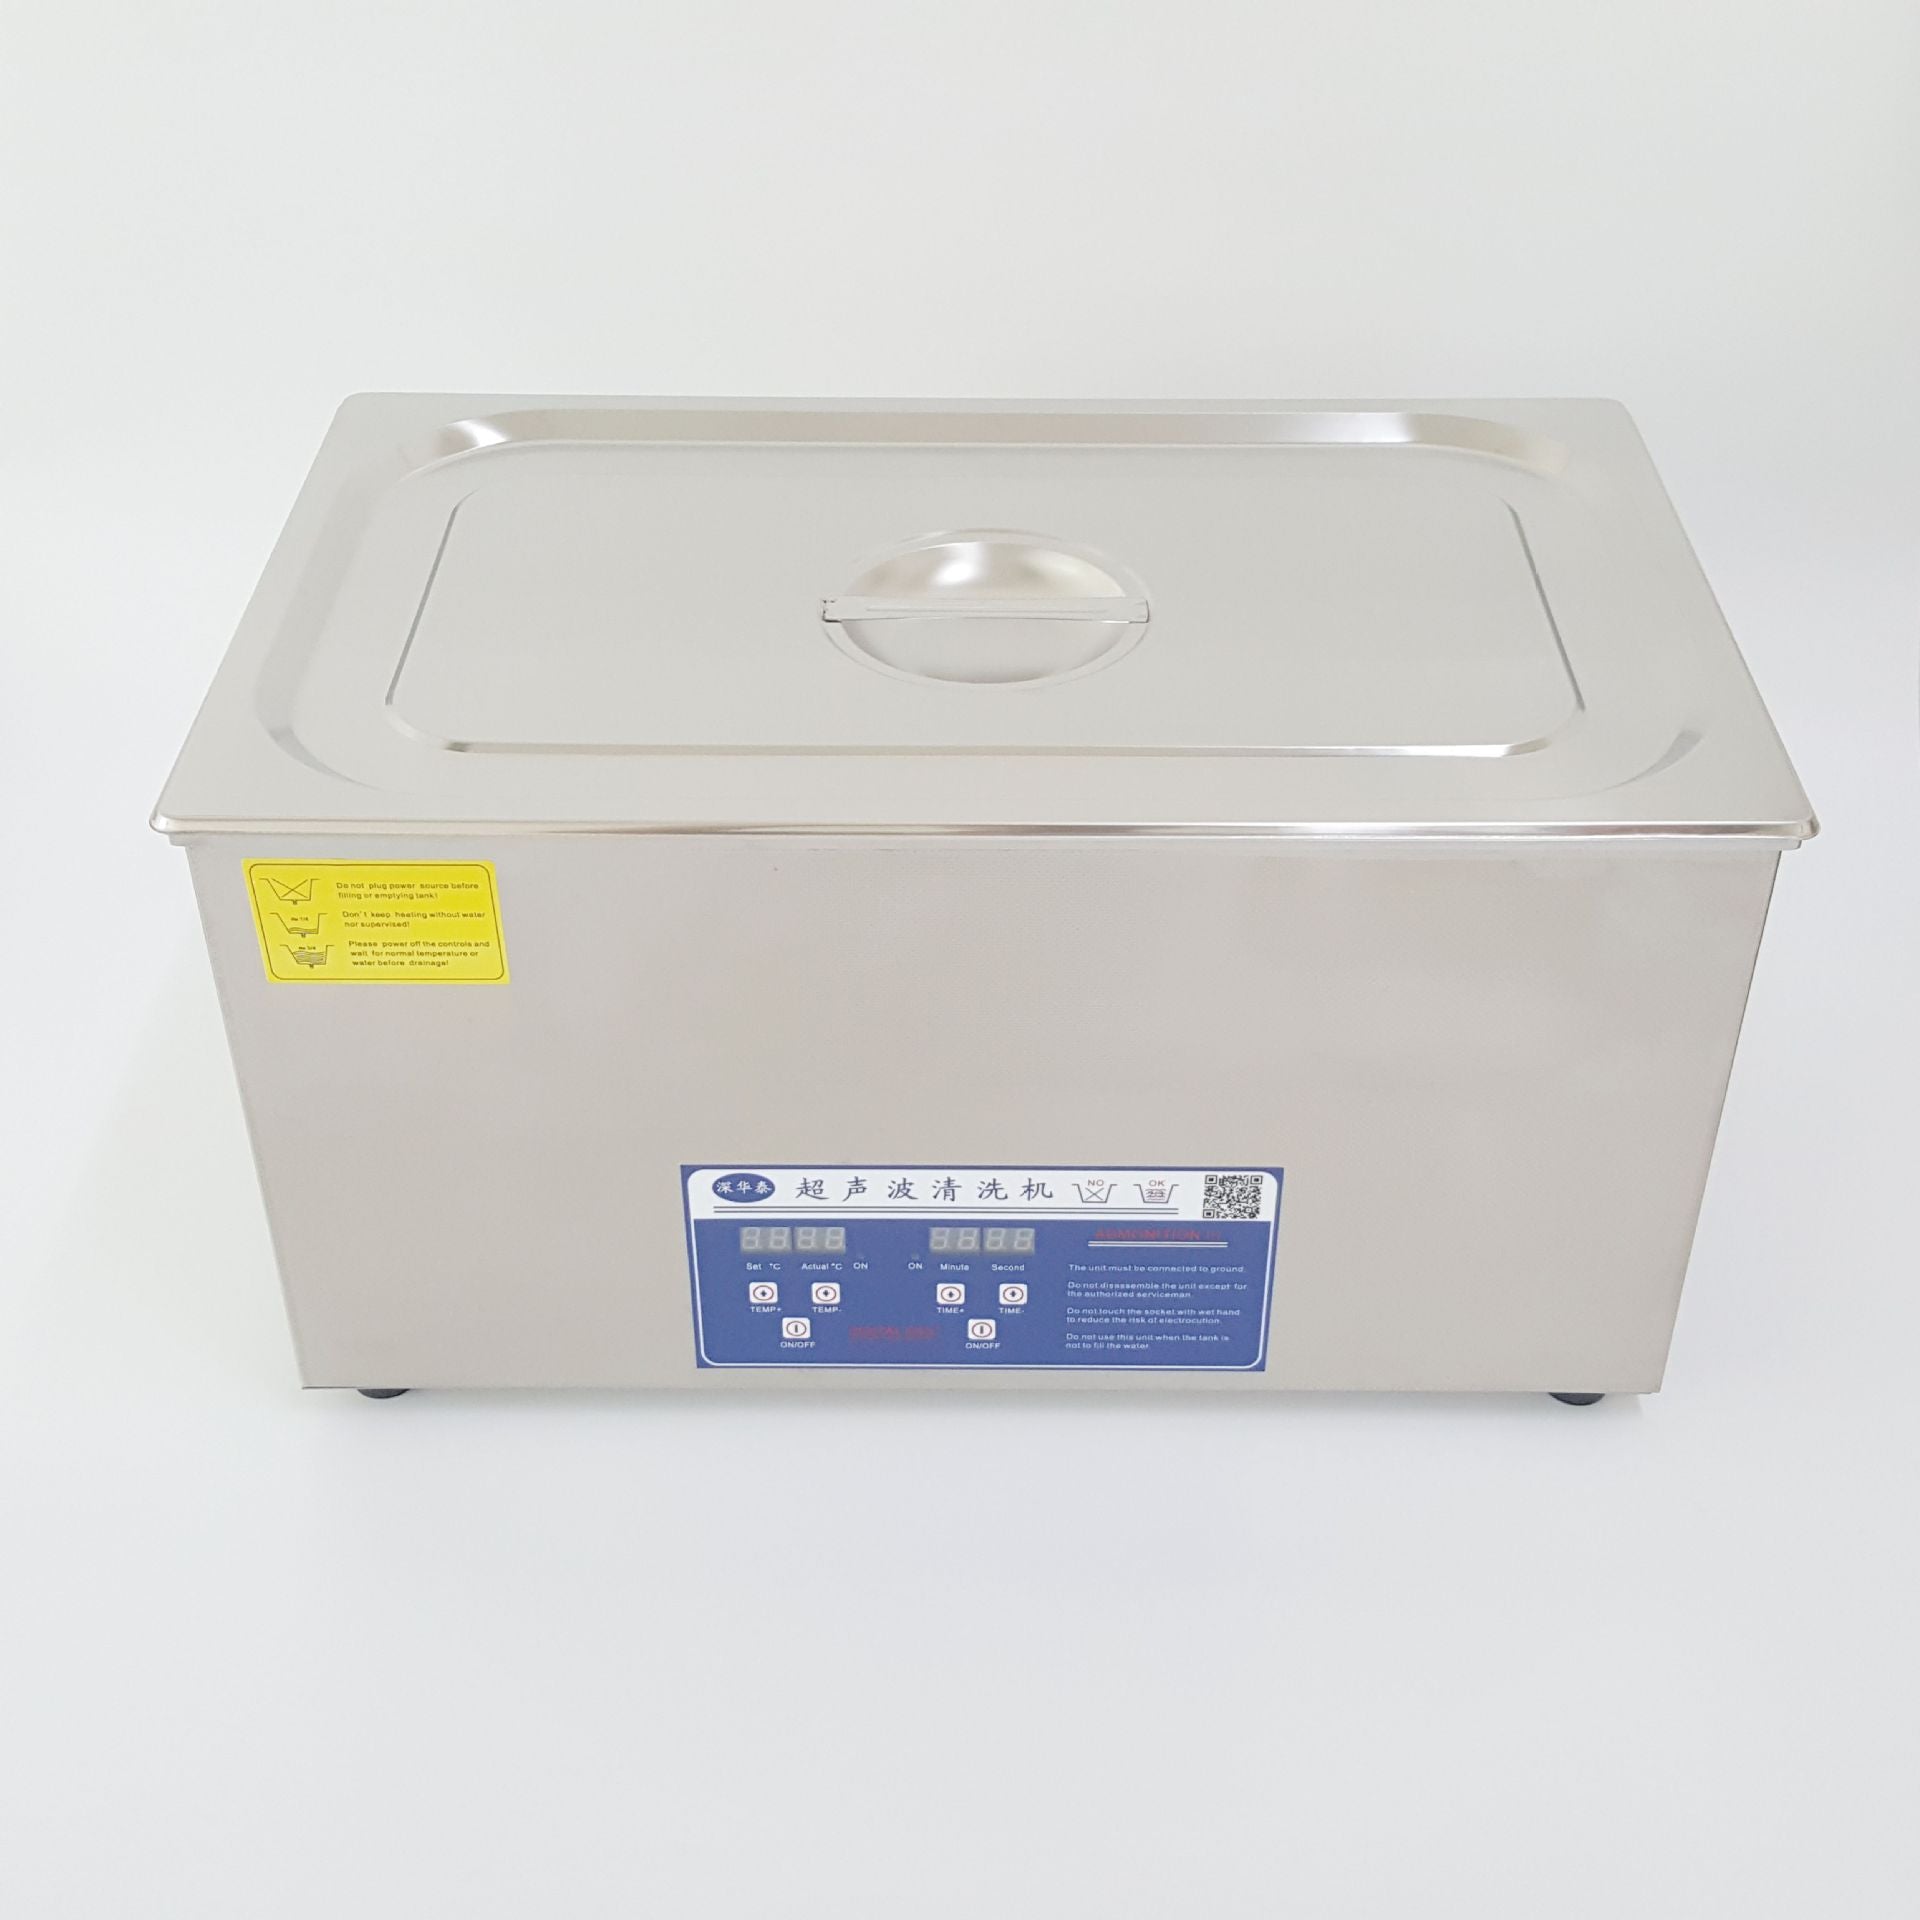 Factory direct numerical control ultrasonic cleaning machine 600W multi-function ultrasonic cleaning equipment support wholesale customization